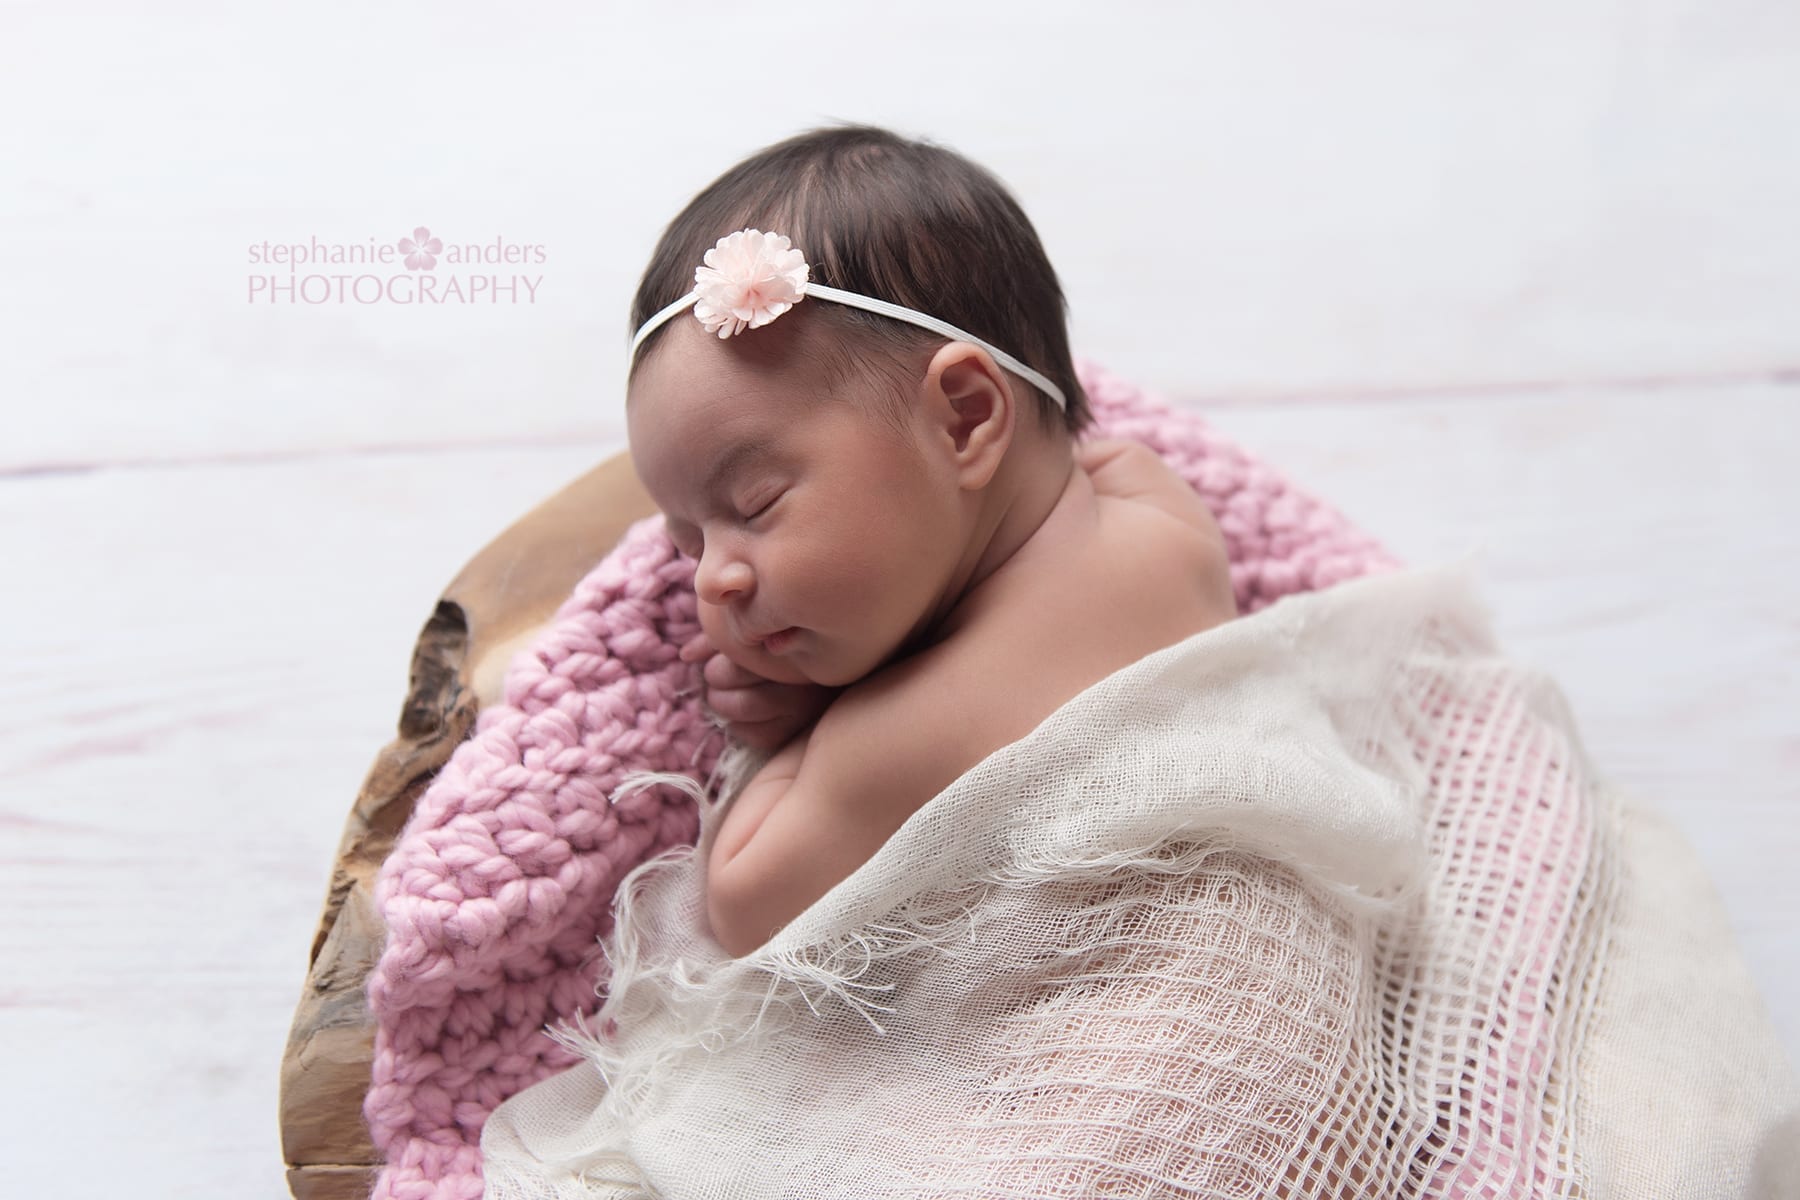 Miami photographer specializing in maternity, newborn, child and family photography